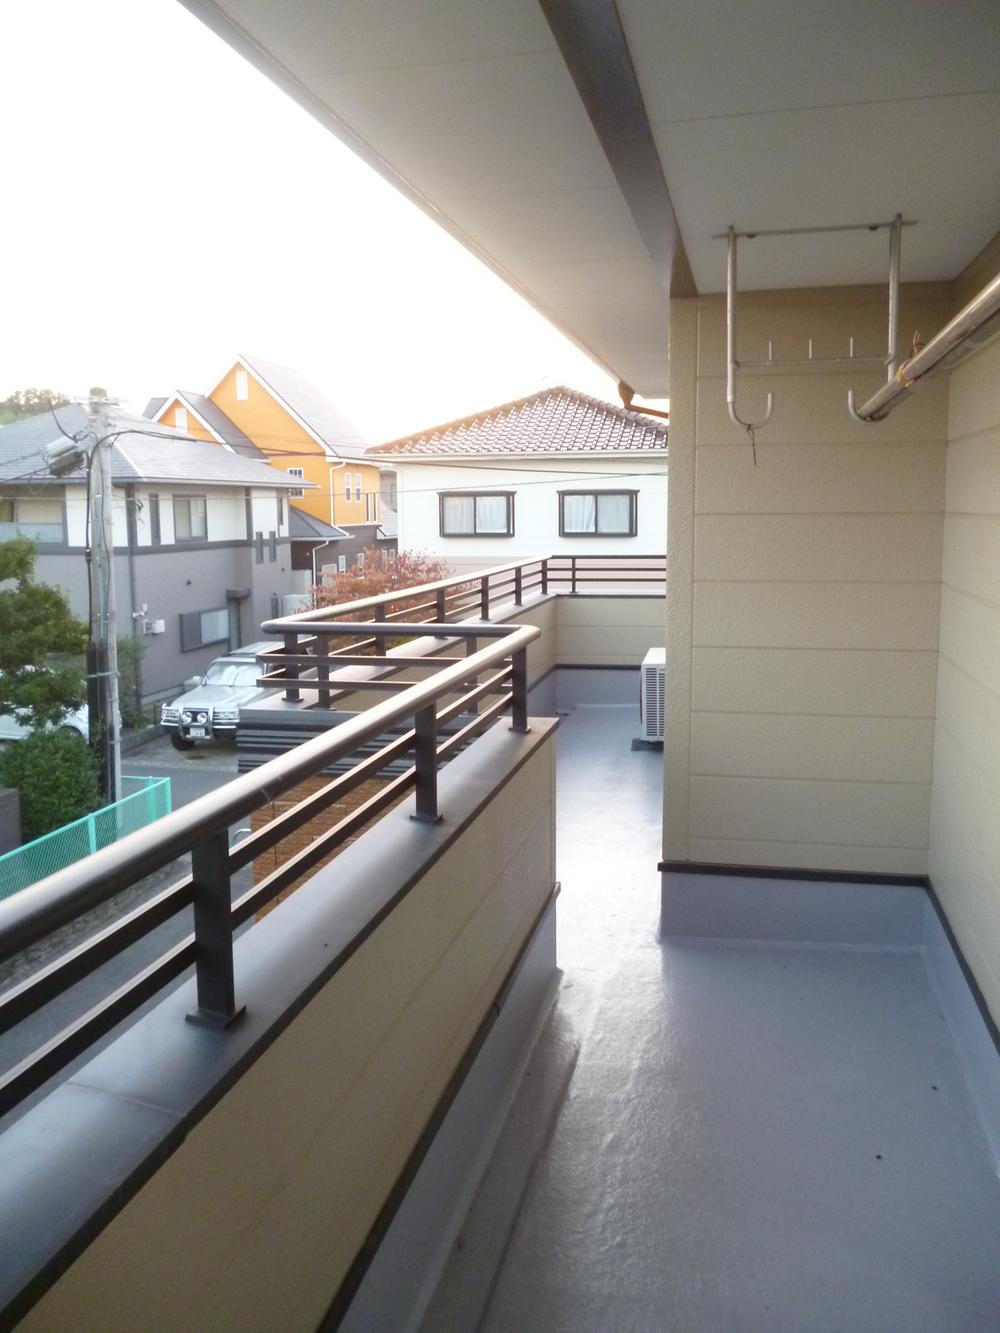 Balcony. Yang per batch in a wide balcony, which is also the total length about 9m ☆ 